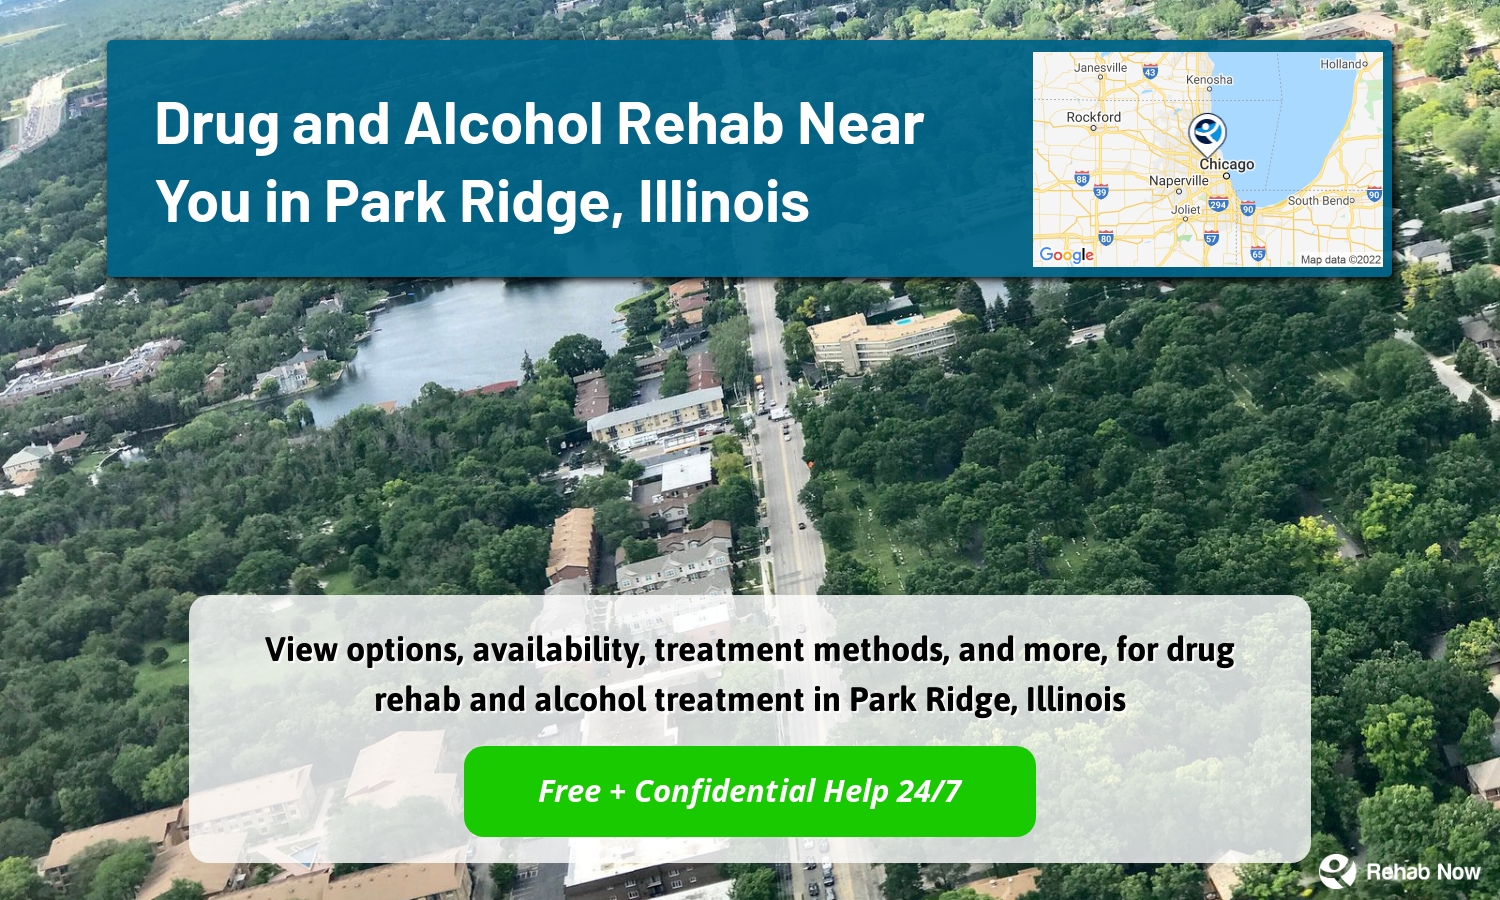 View options, availability, treatment methods, and more, for drug rehab and alcohol treatment in Park Ridge, Illinois